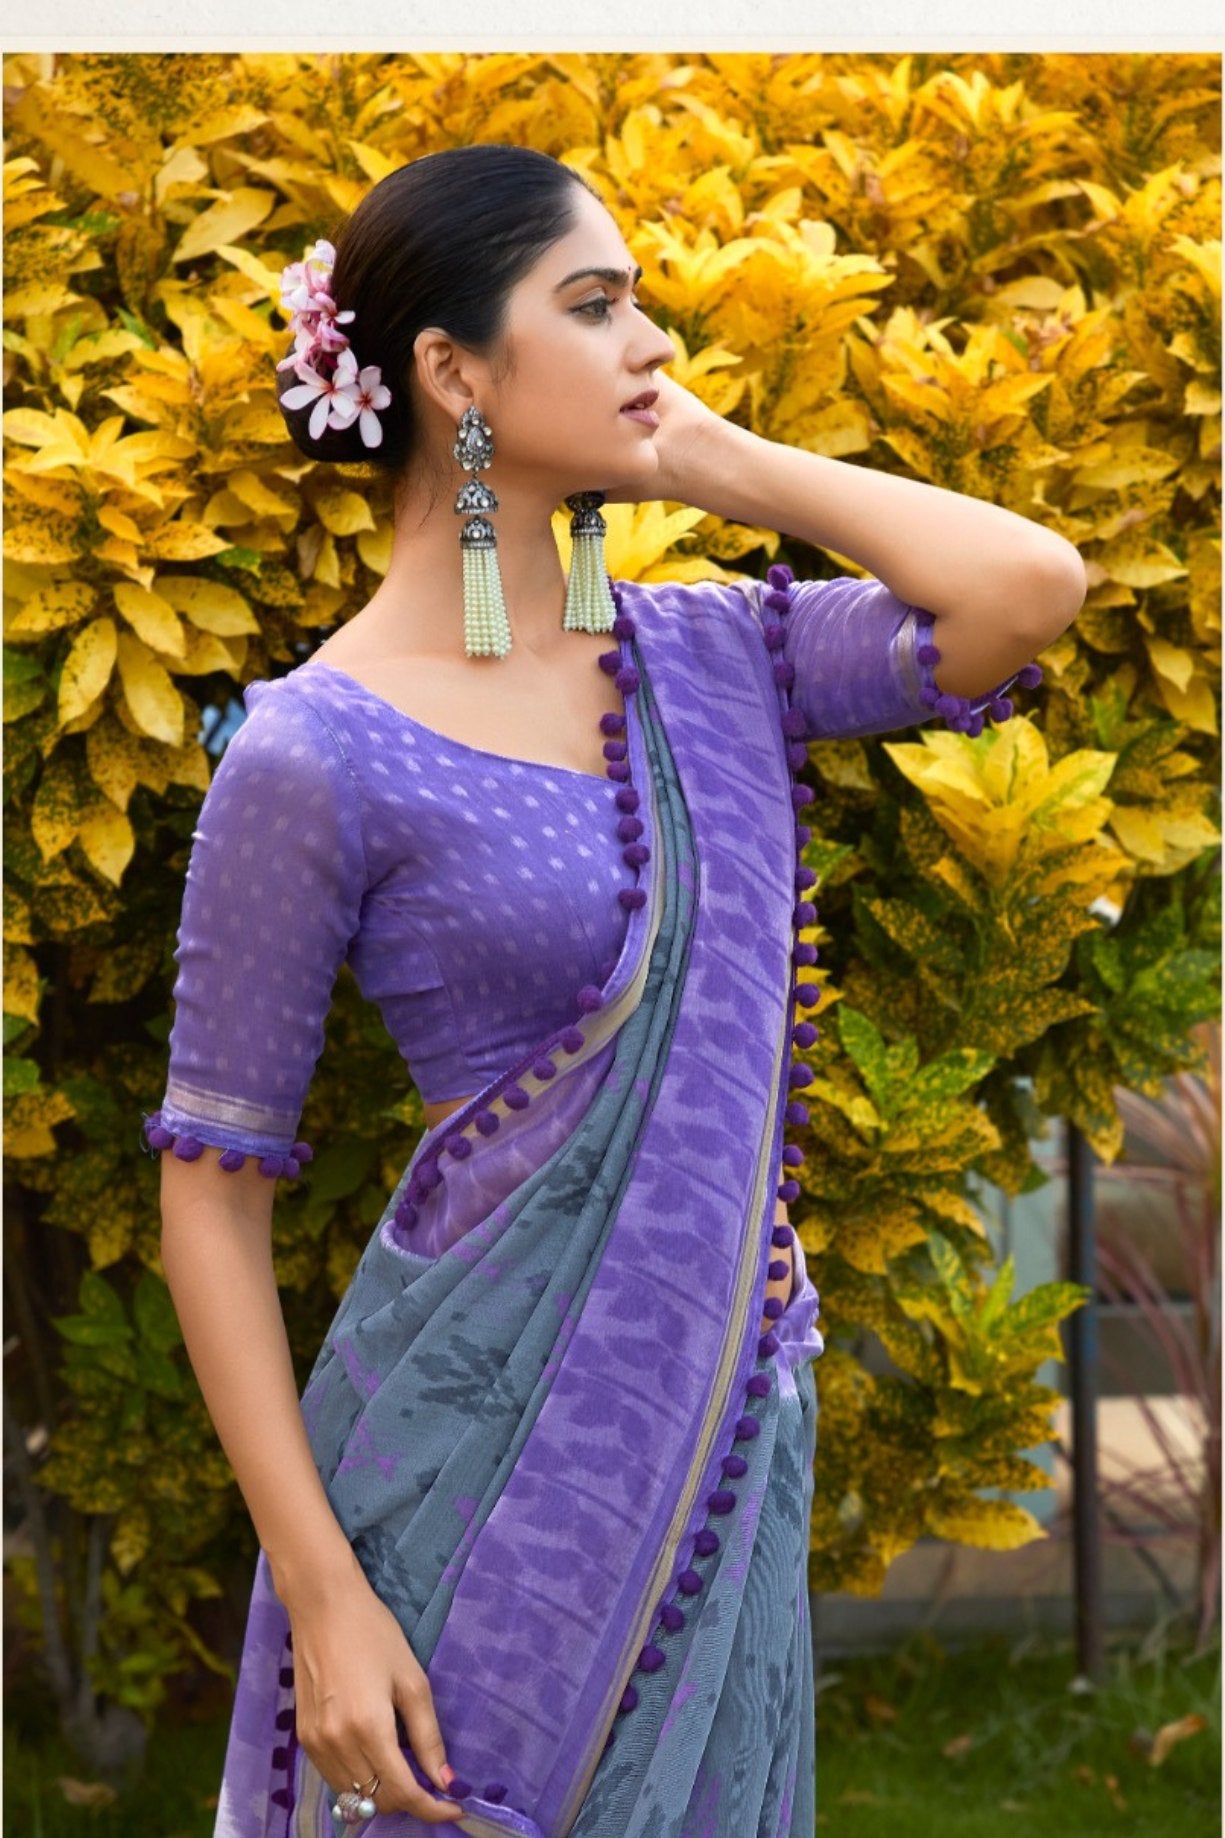 Buy MySilkLove Spindle Grey and Purple Mul Mul Cotton Saree Online